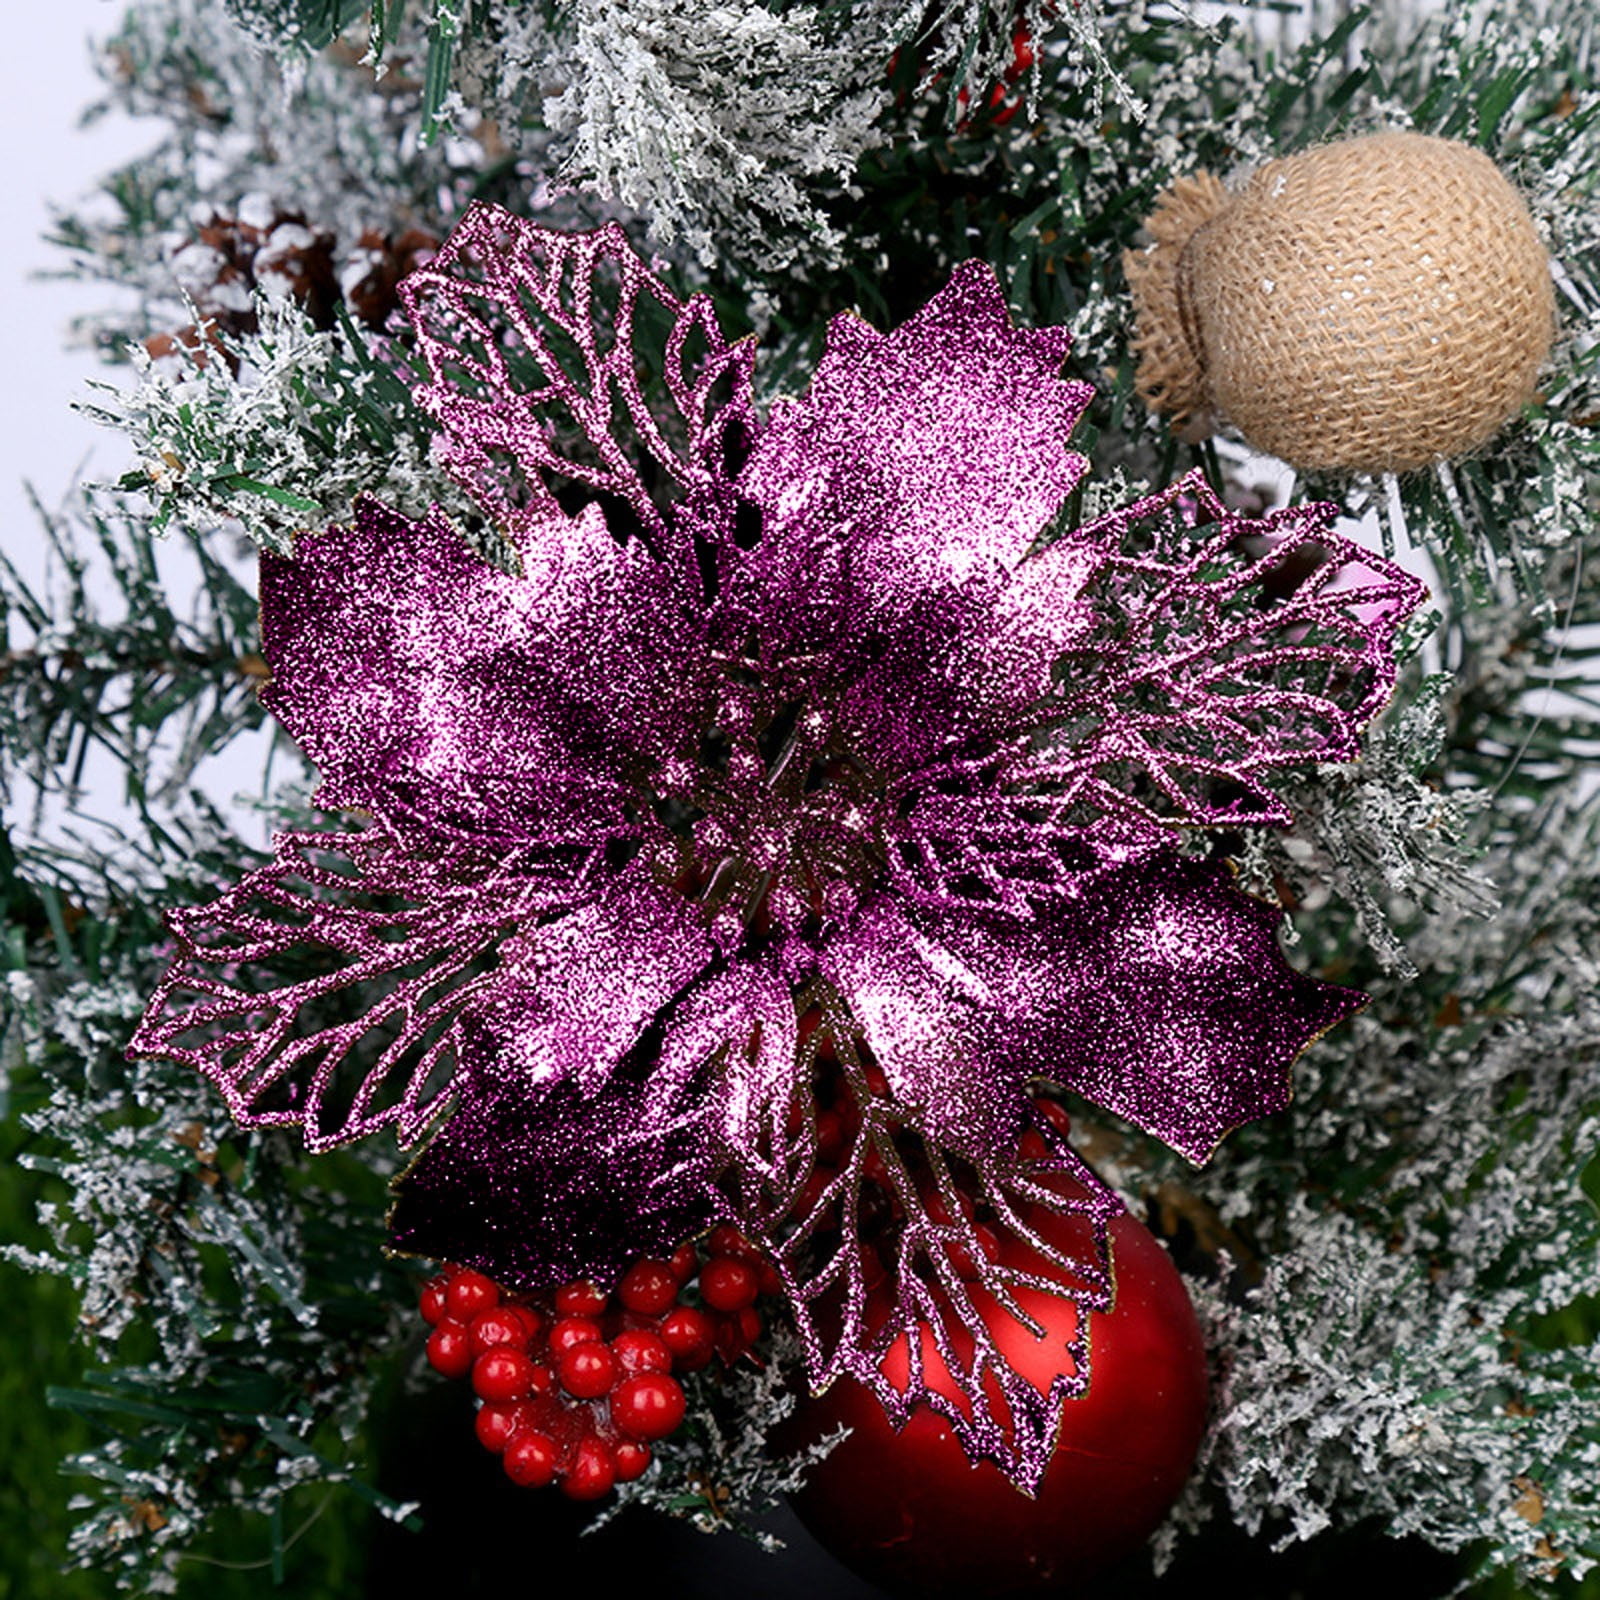 KEUSN Set Of 6 Pcs Christmas Flowers Ornaments Glitter Floral Accessories  Xmas Wreath Tree Decorations For Party Home Wedding Christmas Tree  Ornaments Christmas 